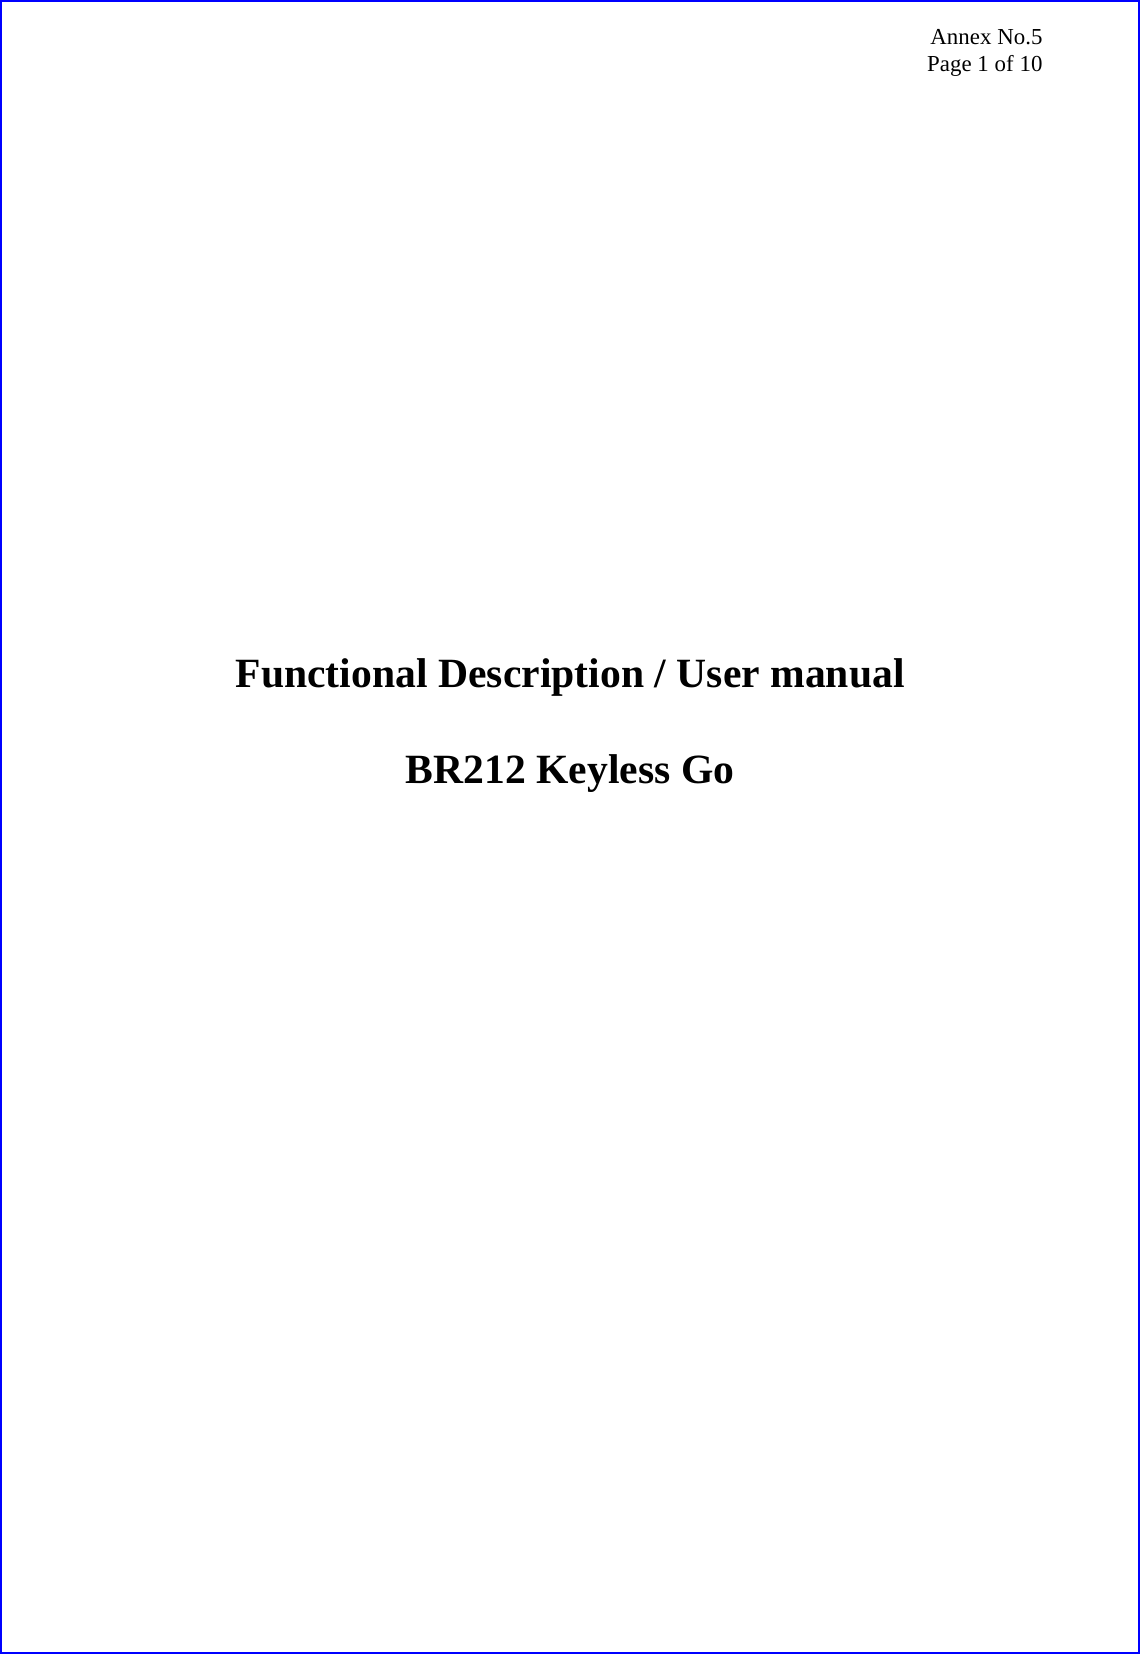 Annex No.5 Page 1 of 10                     Functional Description / User manual  BR212 Keyless Go 